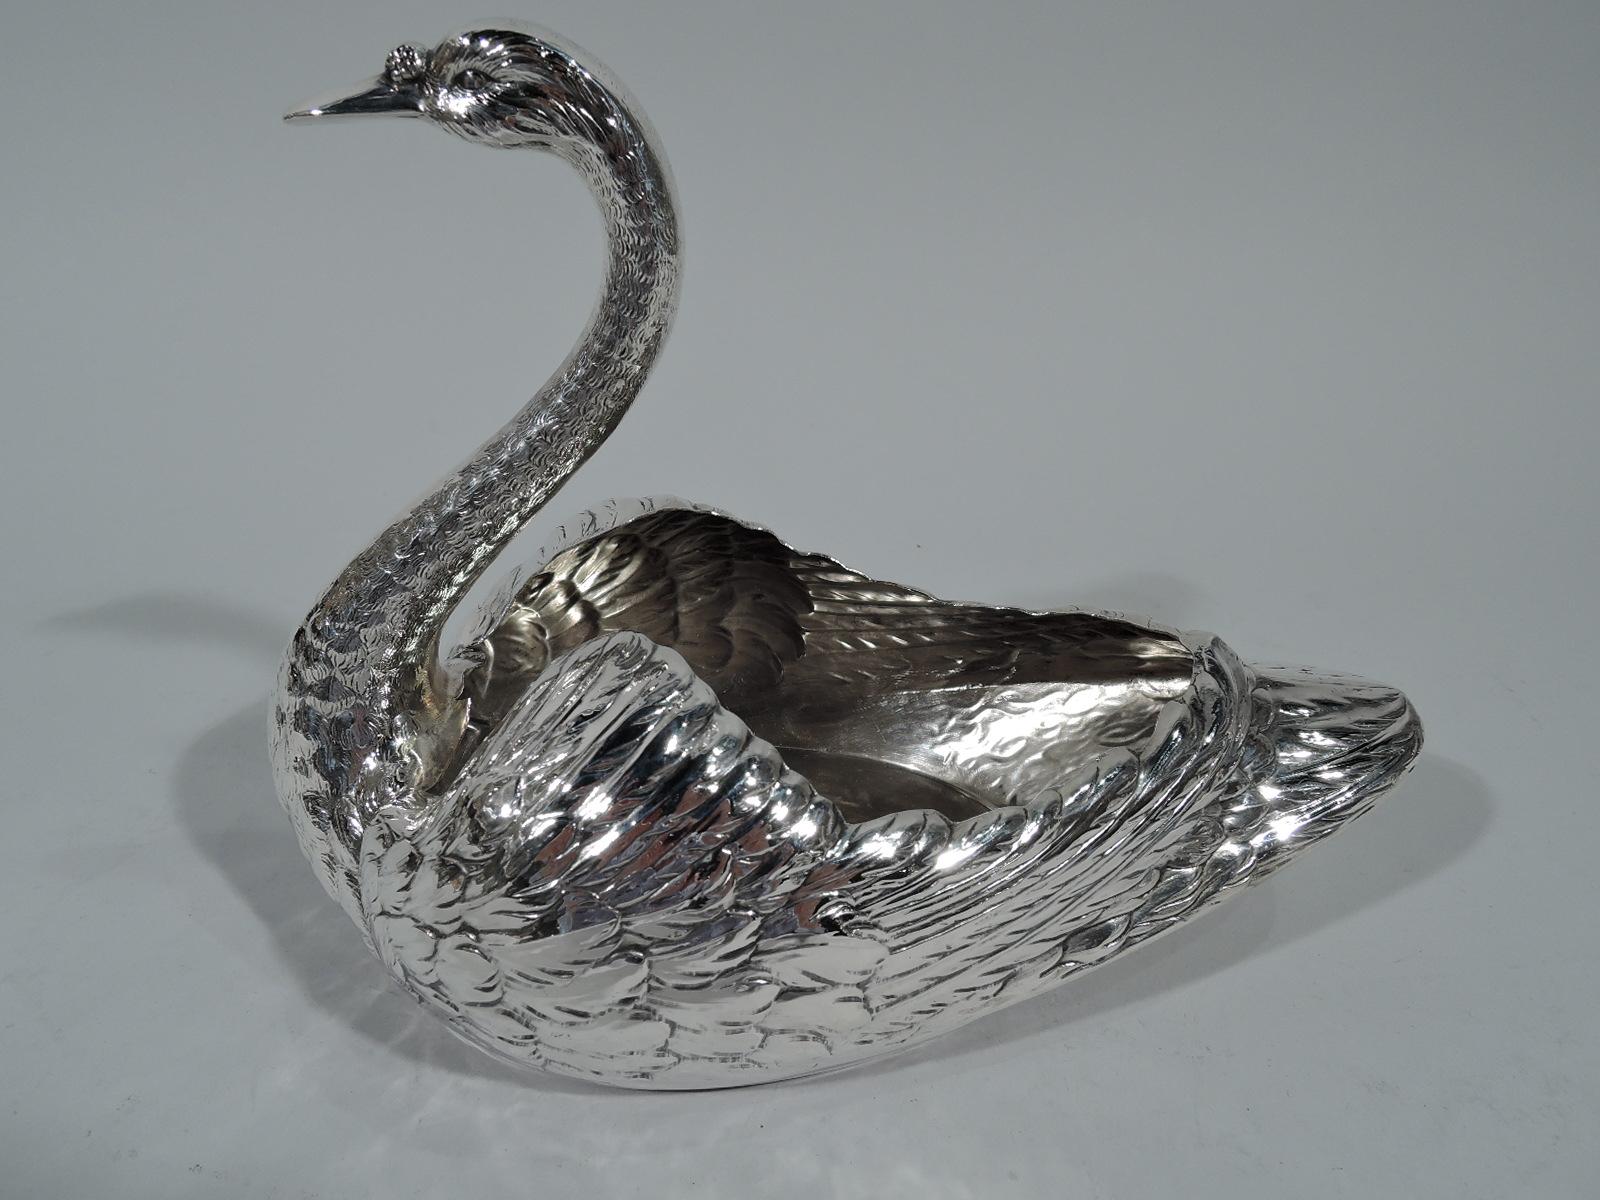 Pair of sterling silver swans. Made by Durgin (part of Gorham) in Concord, New Hampshire. Each: Distinctive feathering with downy plumed wings and scaly neck as well as closed bill and penetrating eyes. Hollow bodies waiting to be filled with